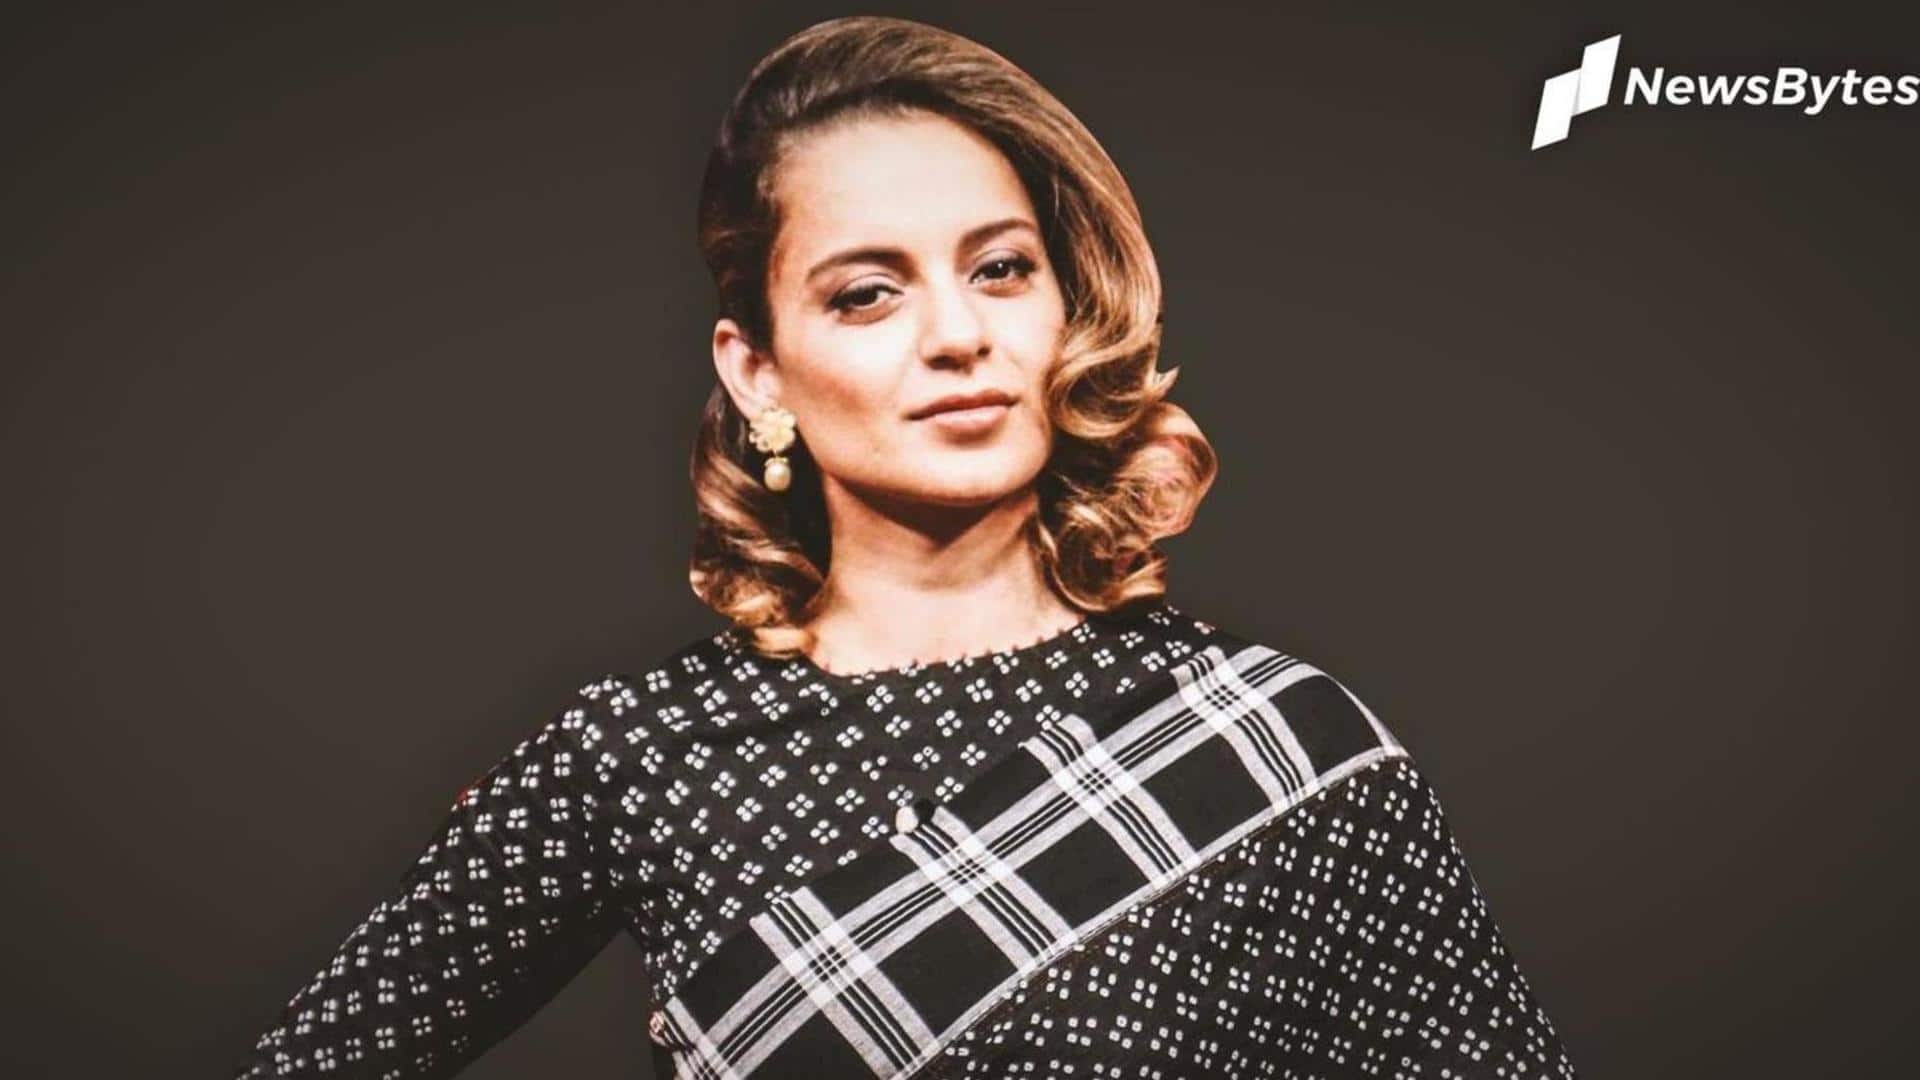 Kangana claims her comments on 'anti-nationals' cost her huge losses